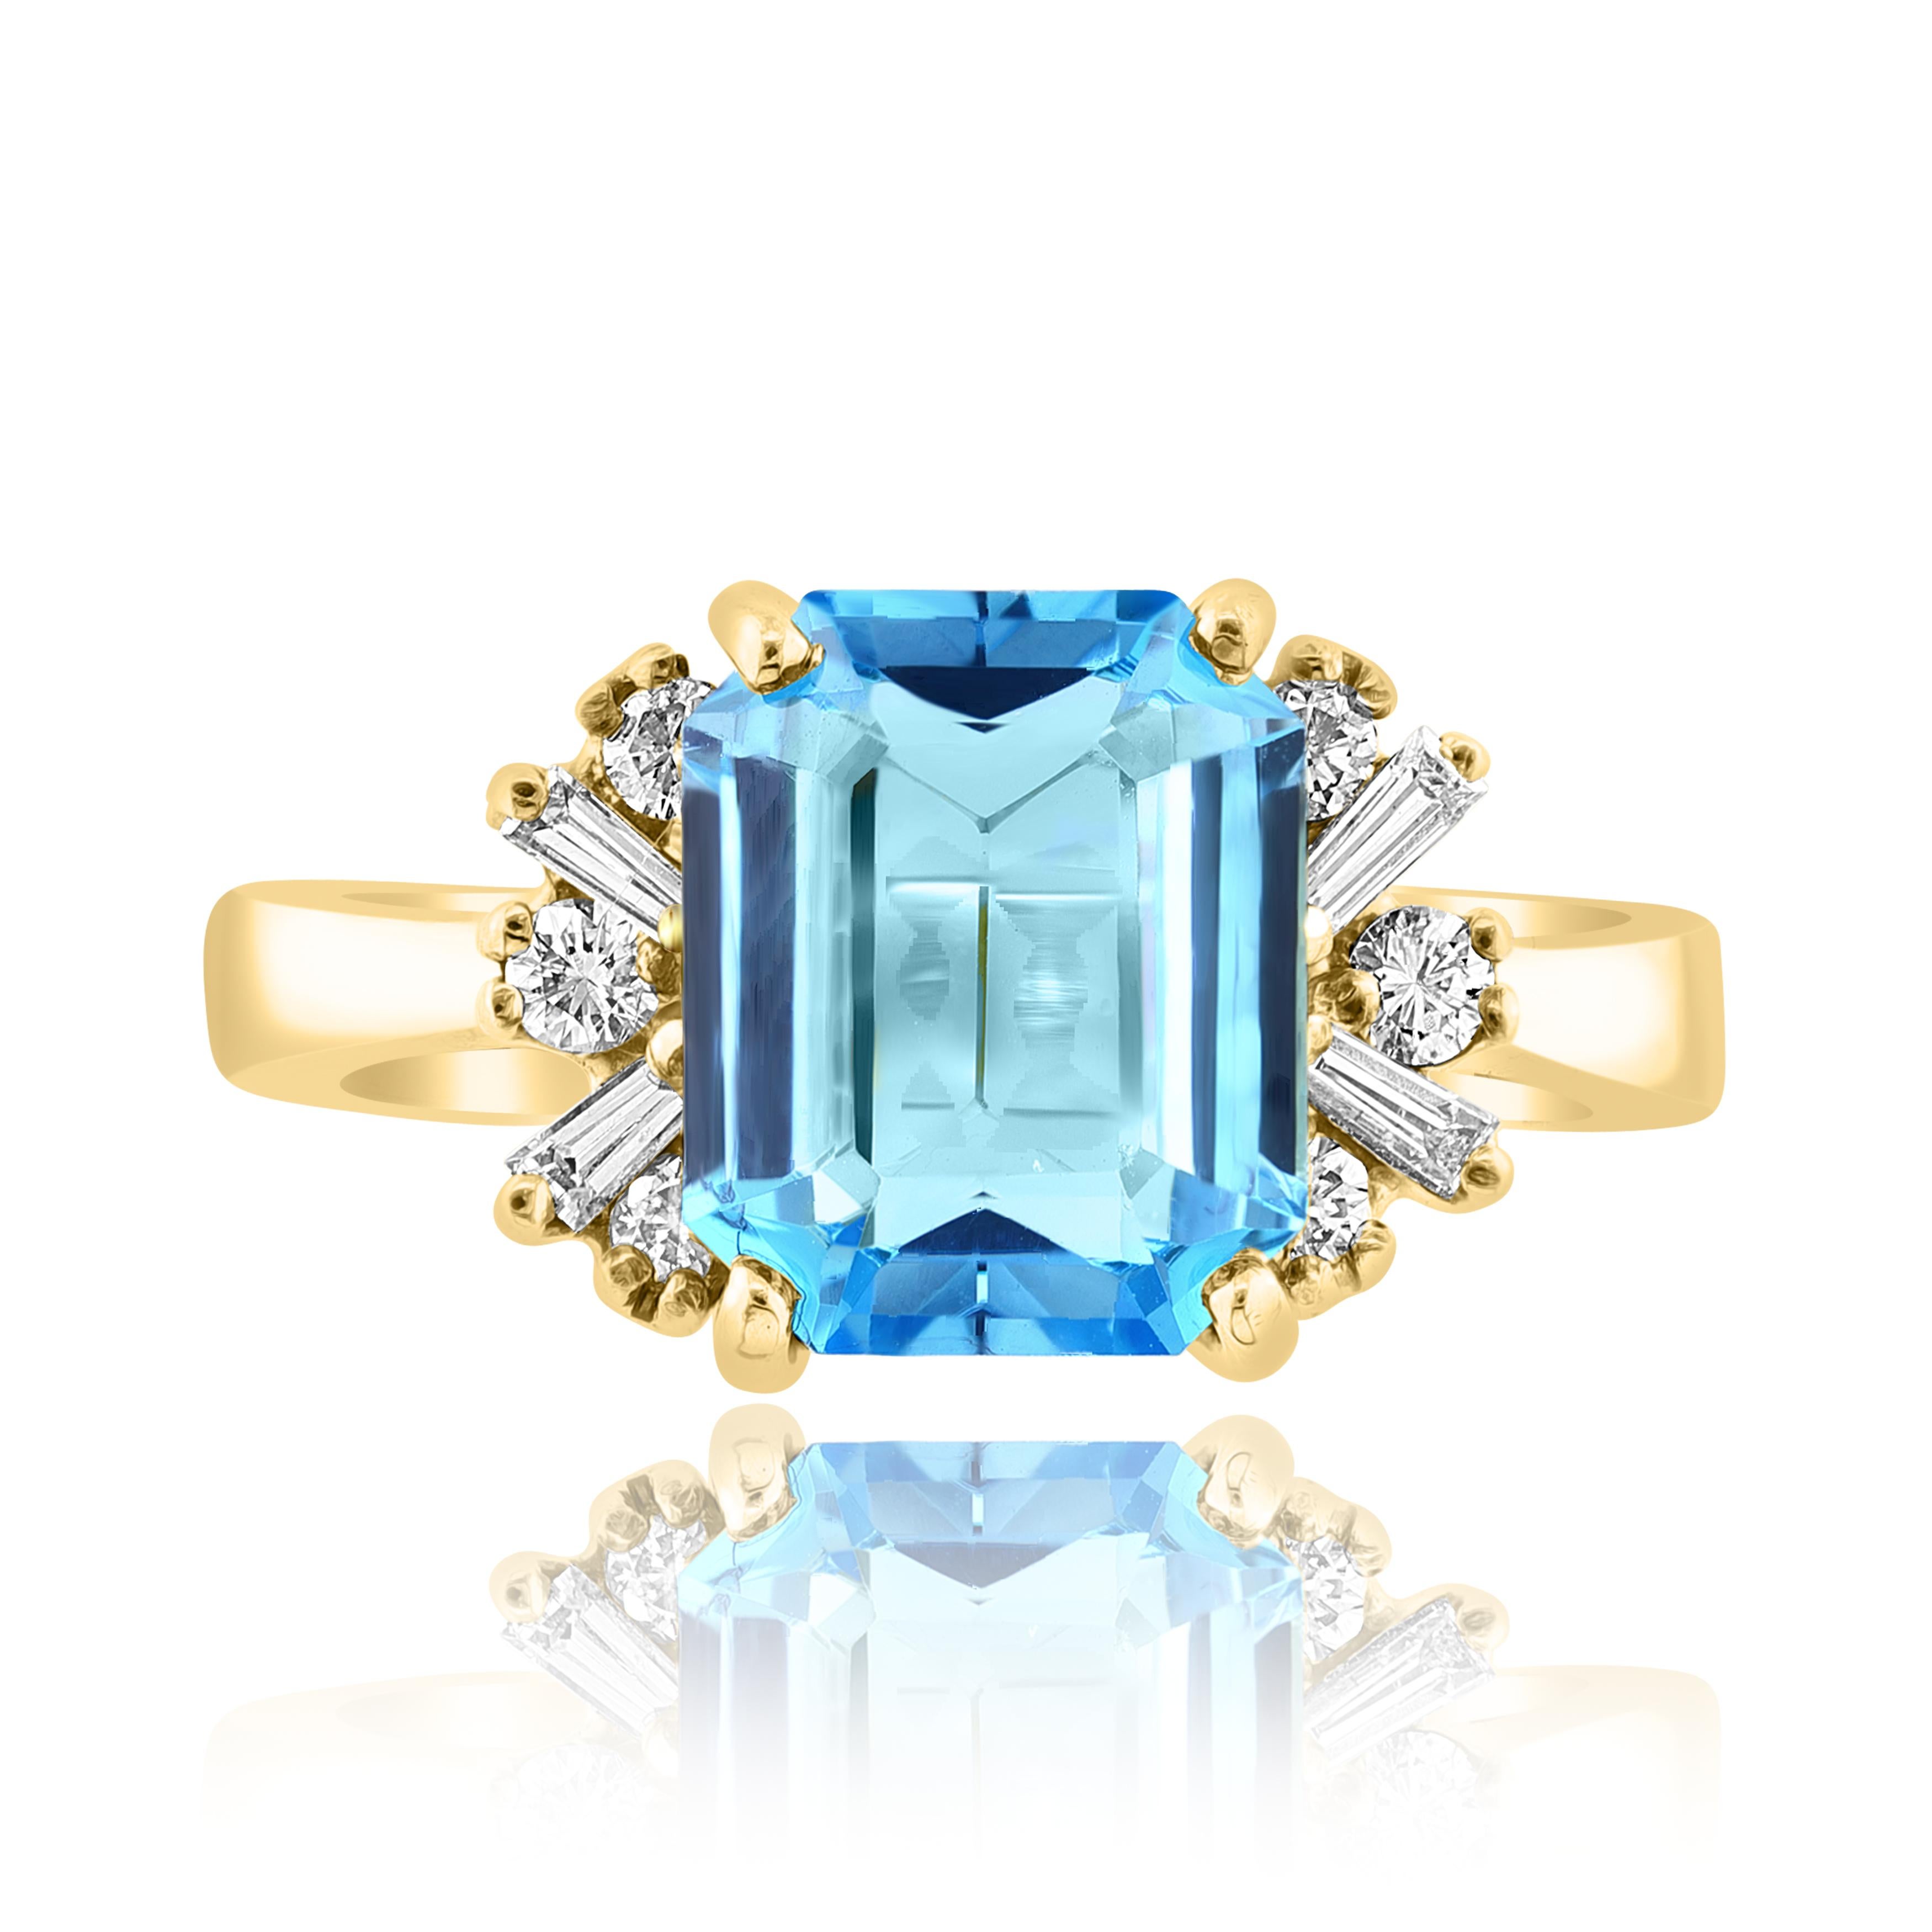 This classic ring with Emerald Cut blue topaz in the center is 3.98 carat with mixed cut diamonds on both sides. 6 round diamonds and 4 baguette diamonds weigh 0.19 carat and are made of 14K Yellow Gold.